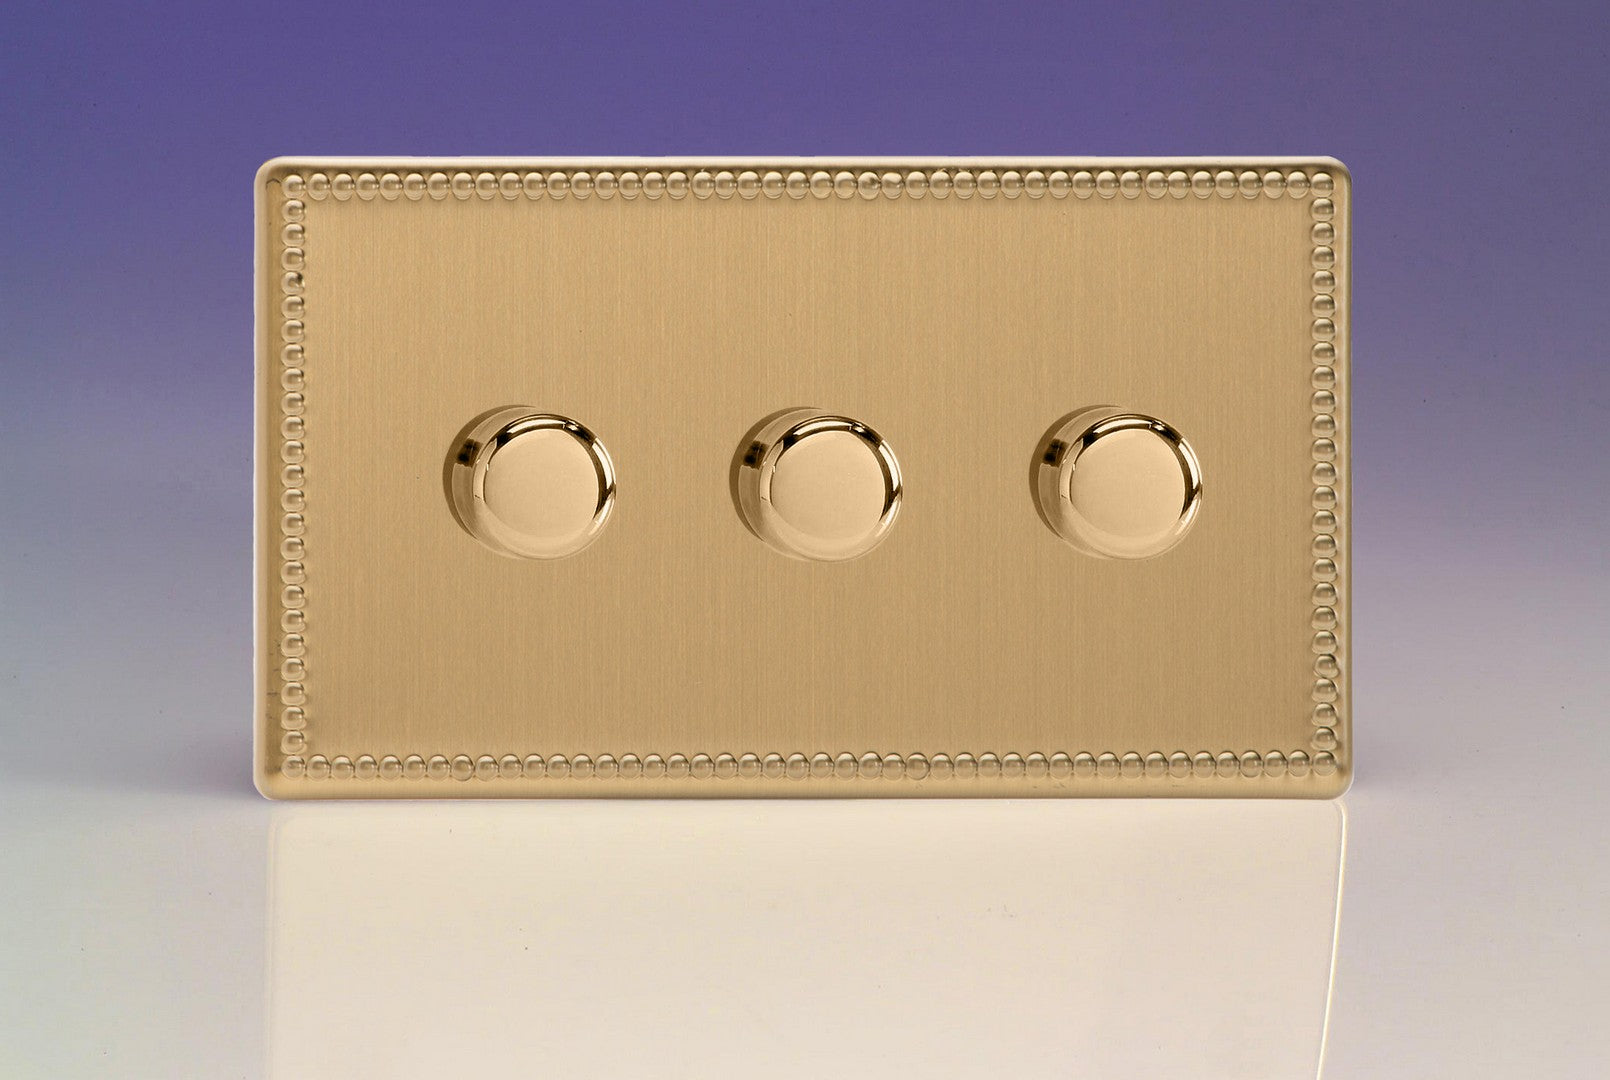 Varilight HDY33S.JB Jubilee Brushed Brass 3-Gang 2-Way Push-On/Off Rotary Dimmer 3 x 60-400W (Twin Plate)